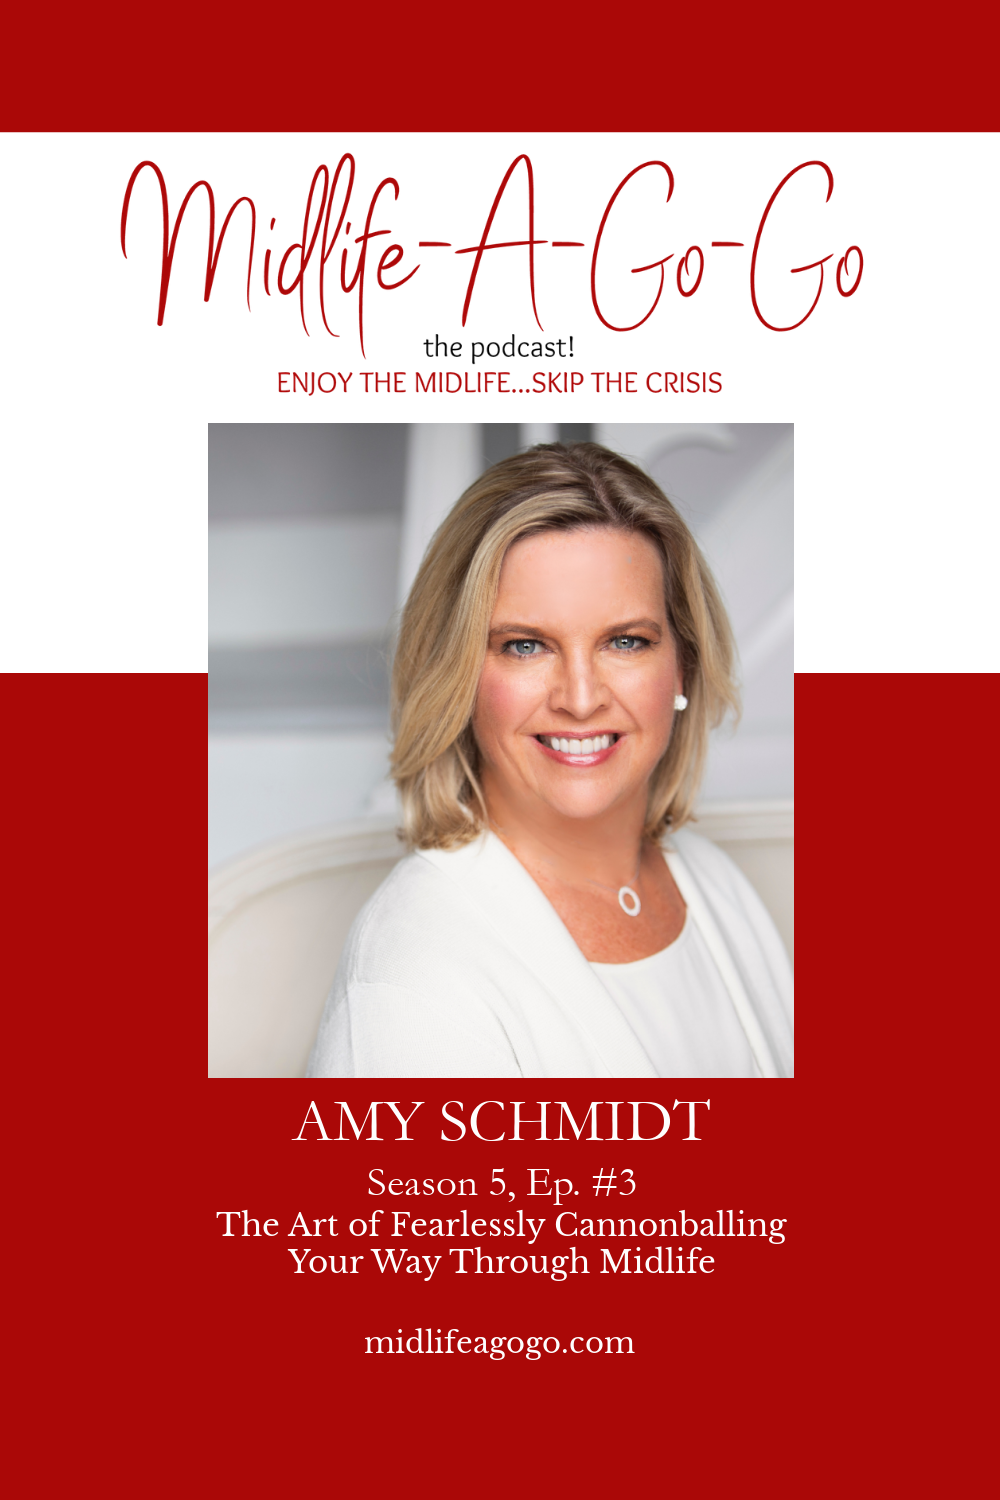 The Art of Fearlessly Cannonballing Your Way Through Midlife with Guest Amy Schmidt